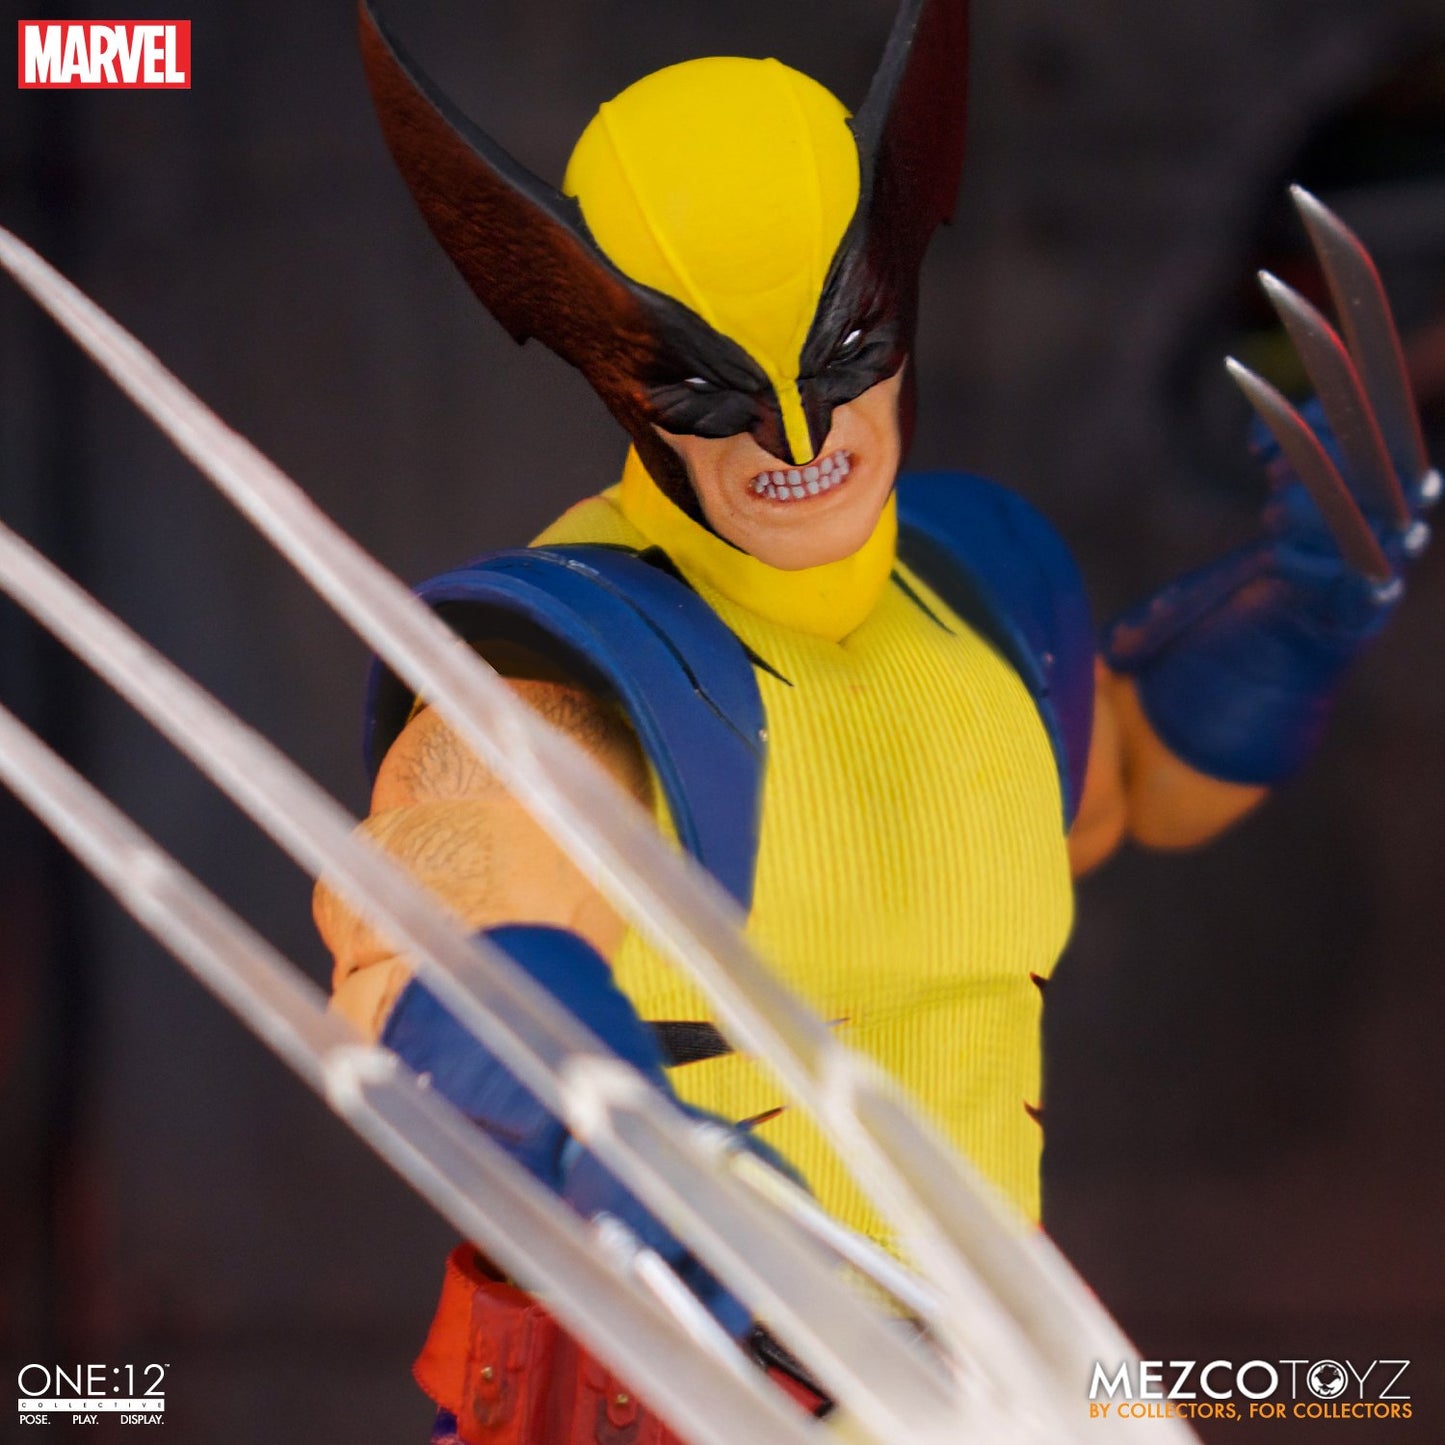 Mezco - ONE:12 COLLECTIVE Wolverine - Deluxe Steel Box Edition